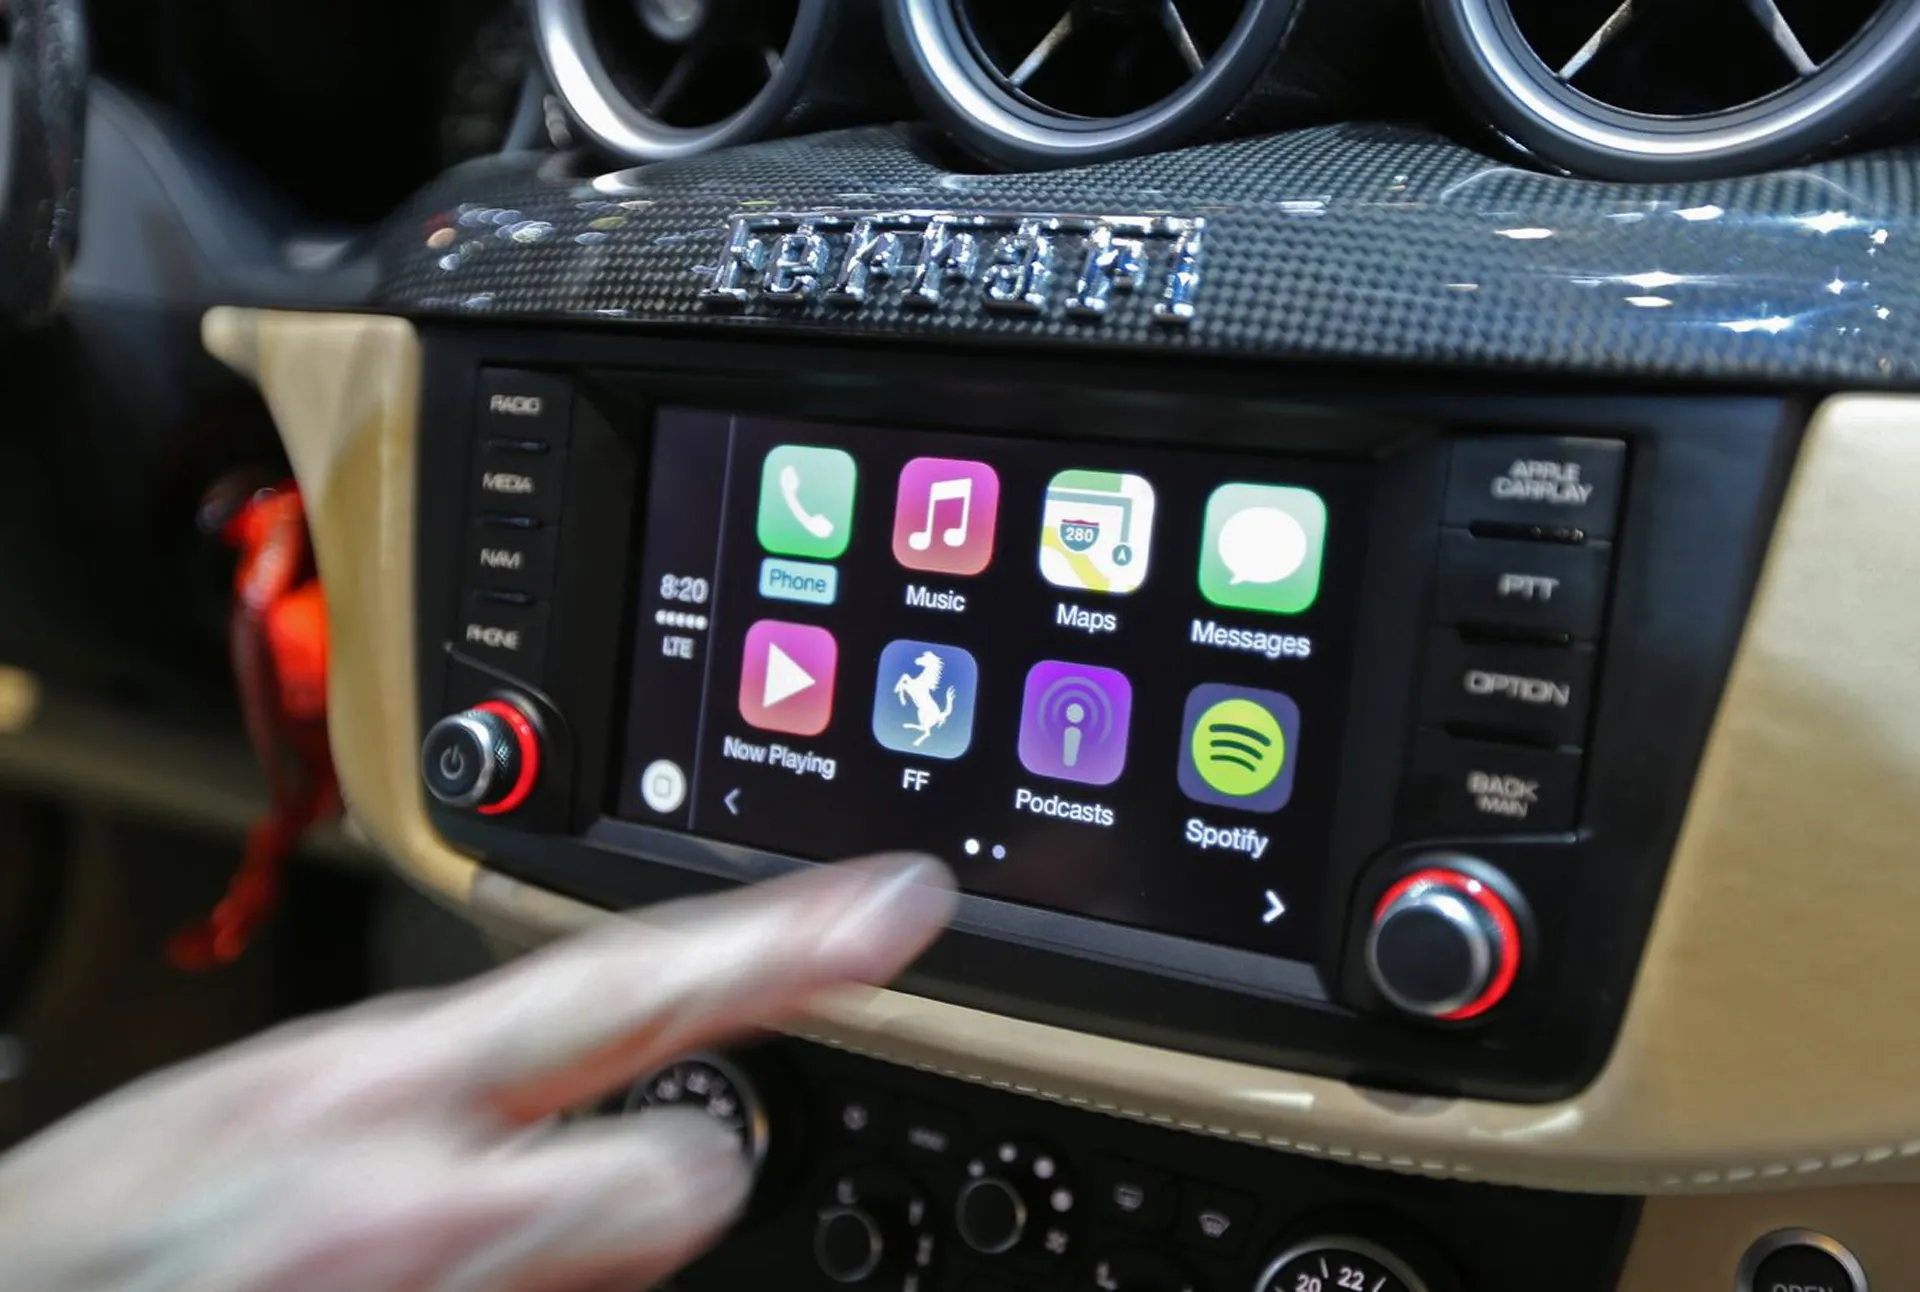 Ferrari ditches native navigation because smartphones are better